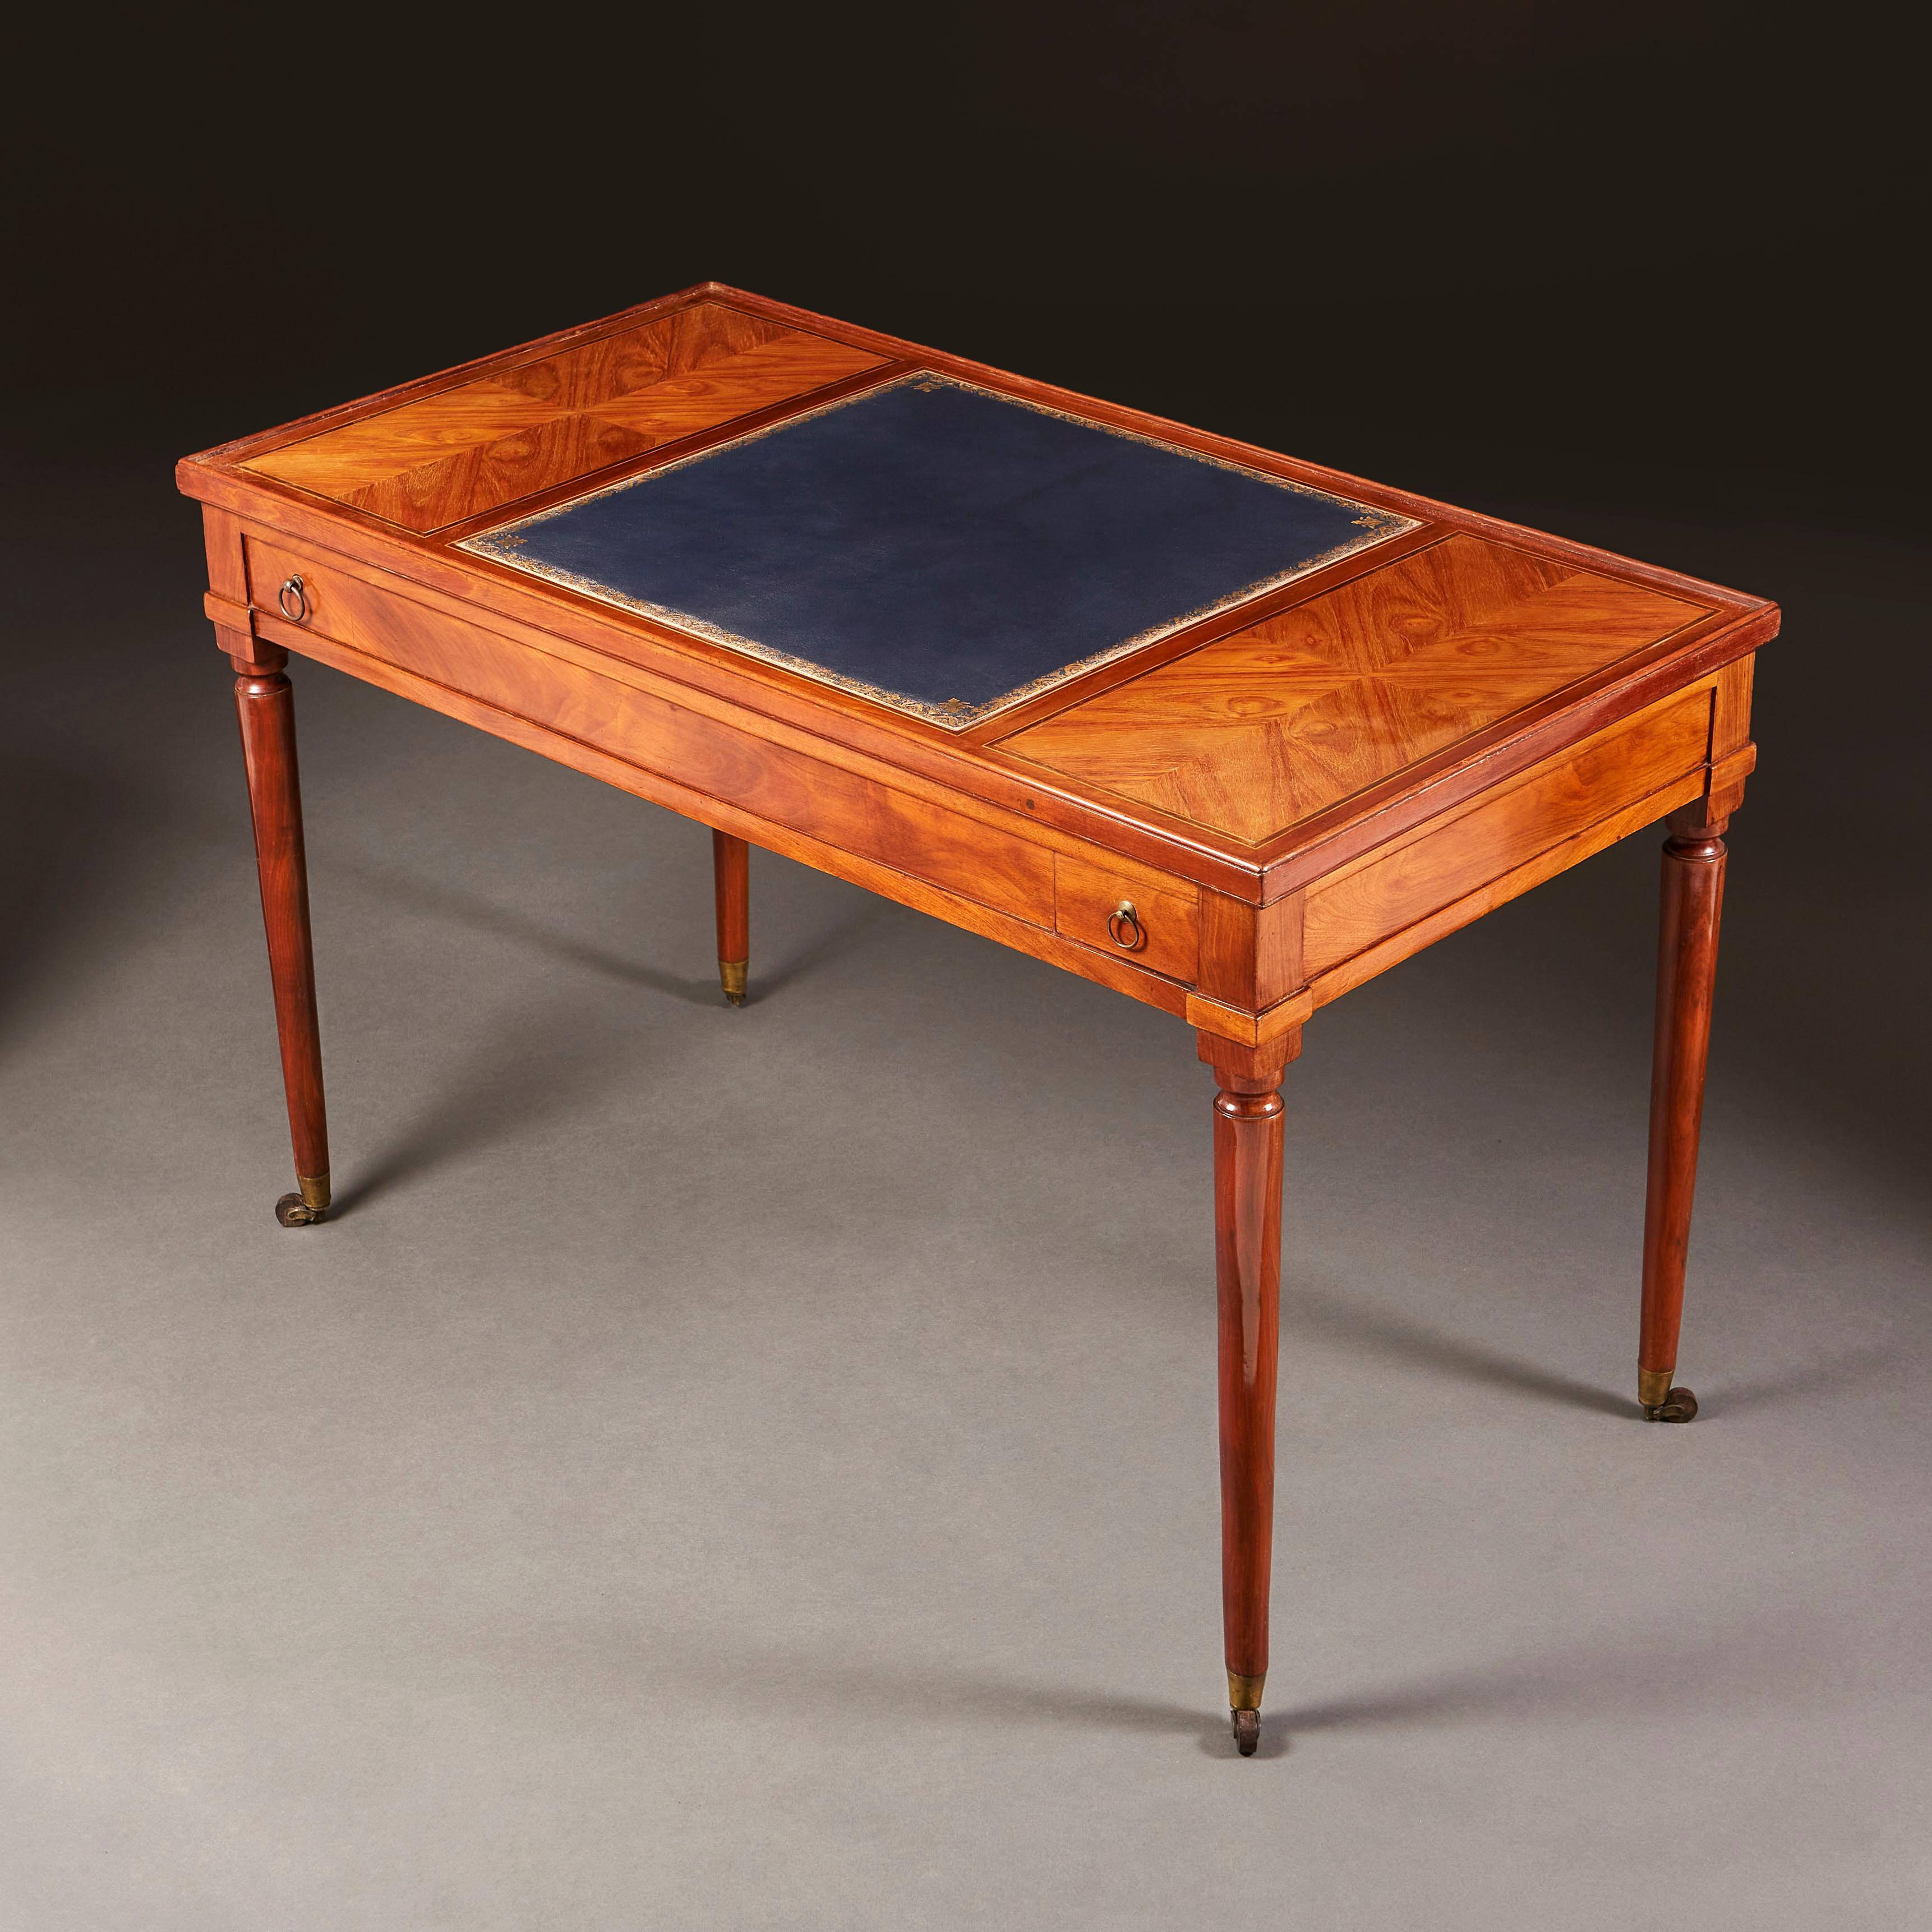 Early Nineteenth Century Tric Trac Table 1